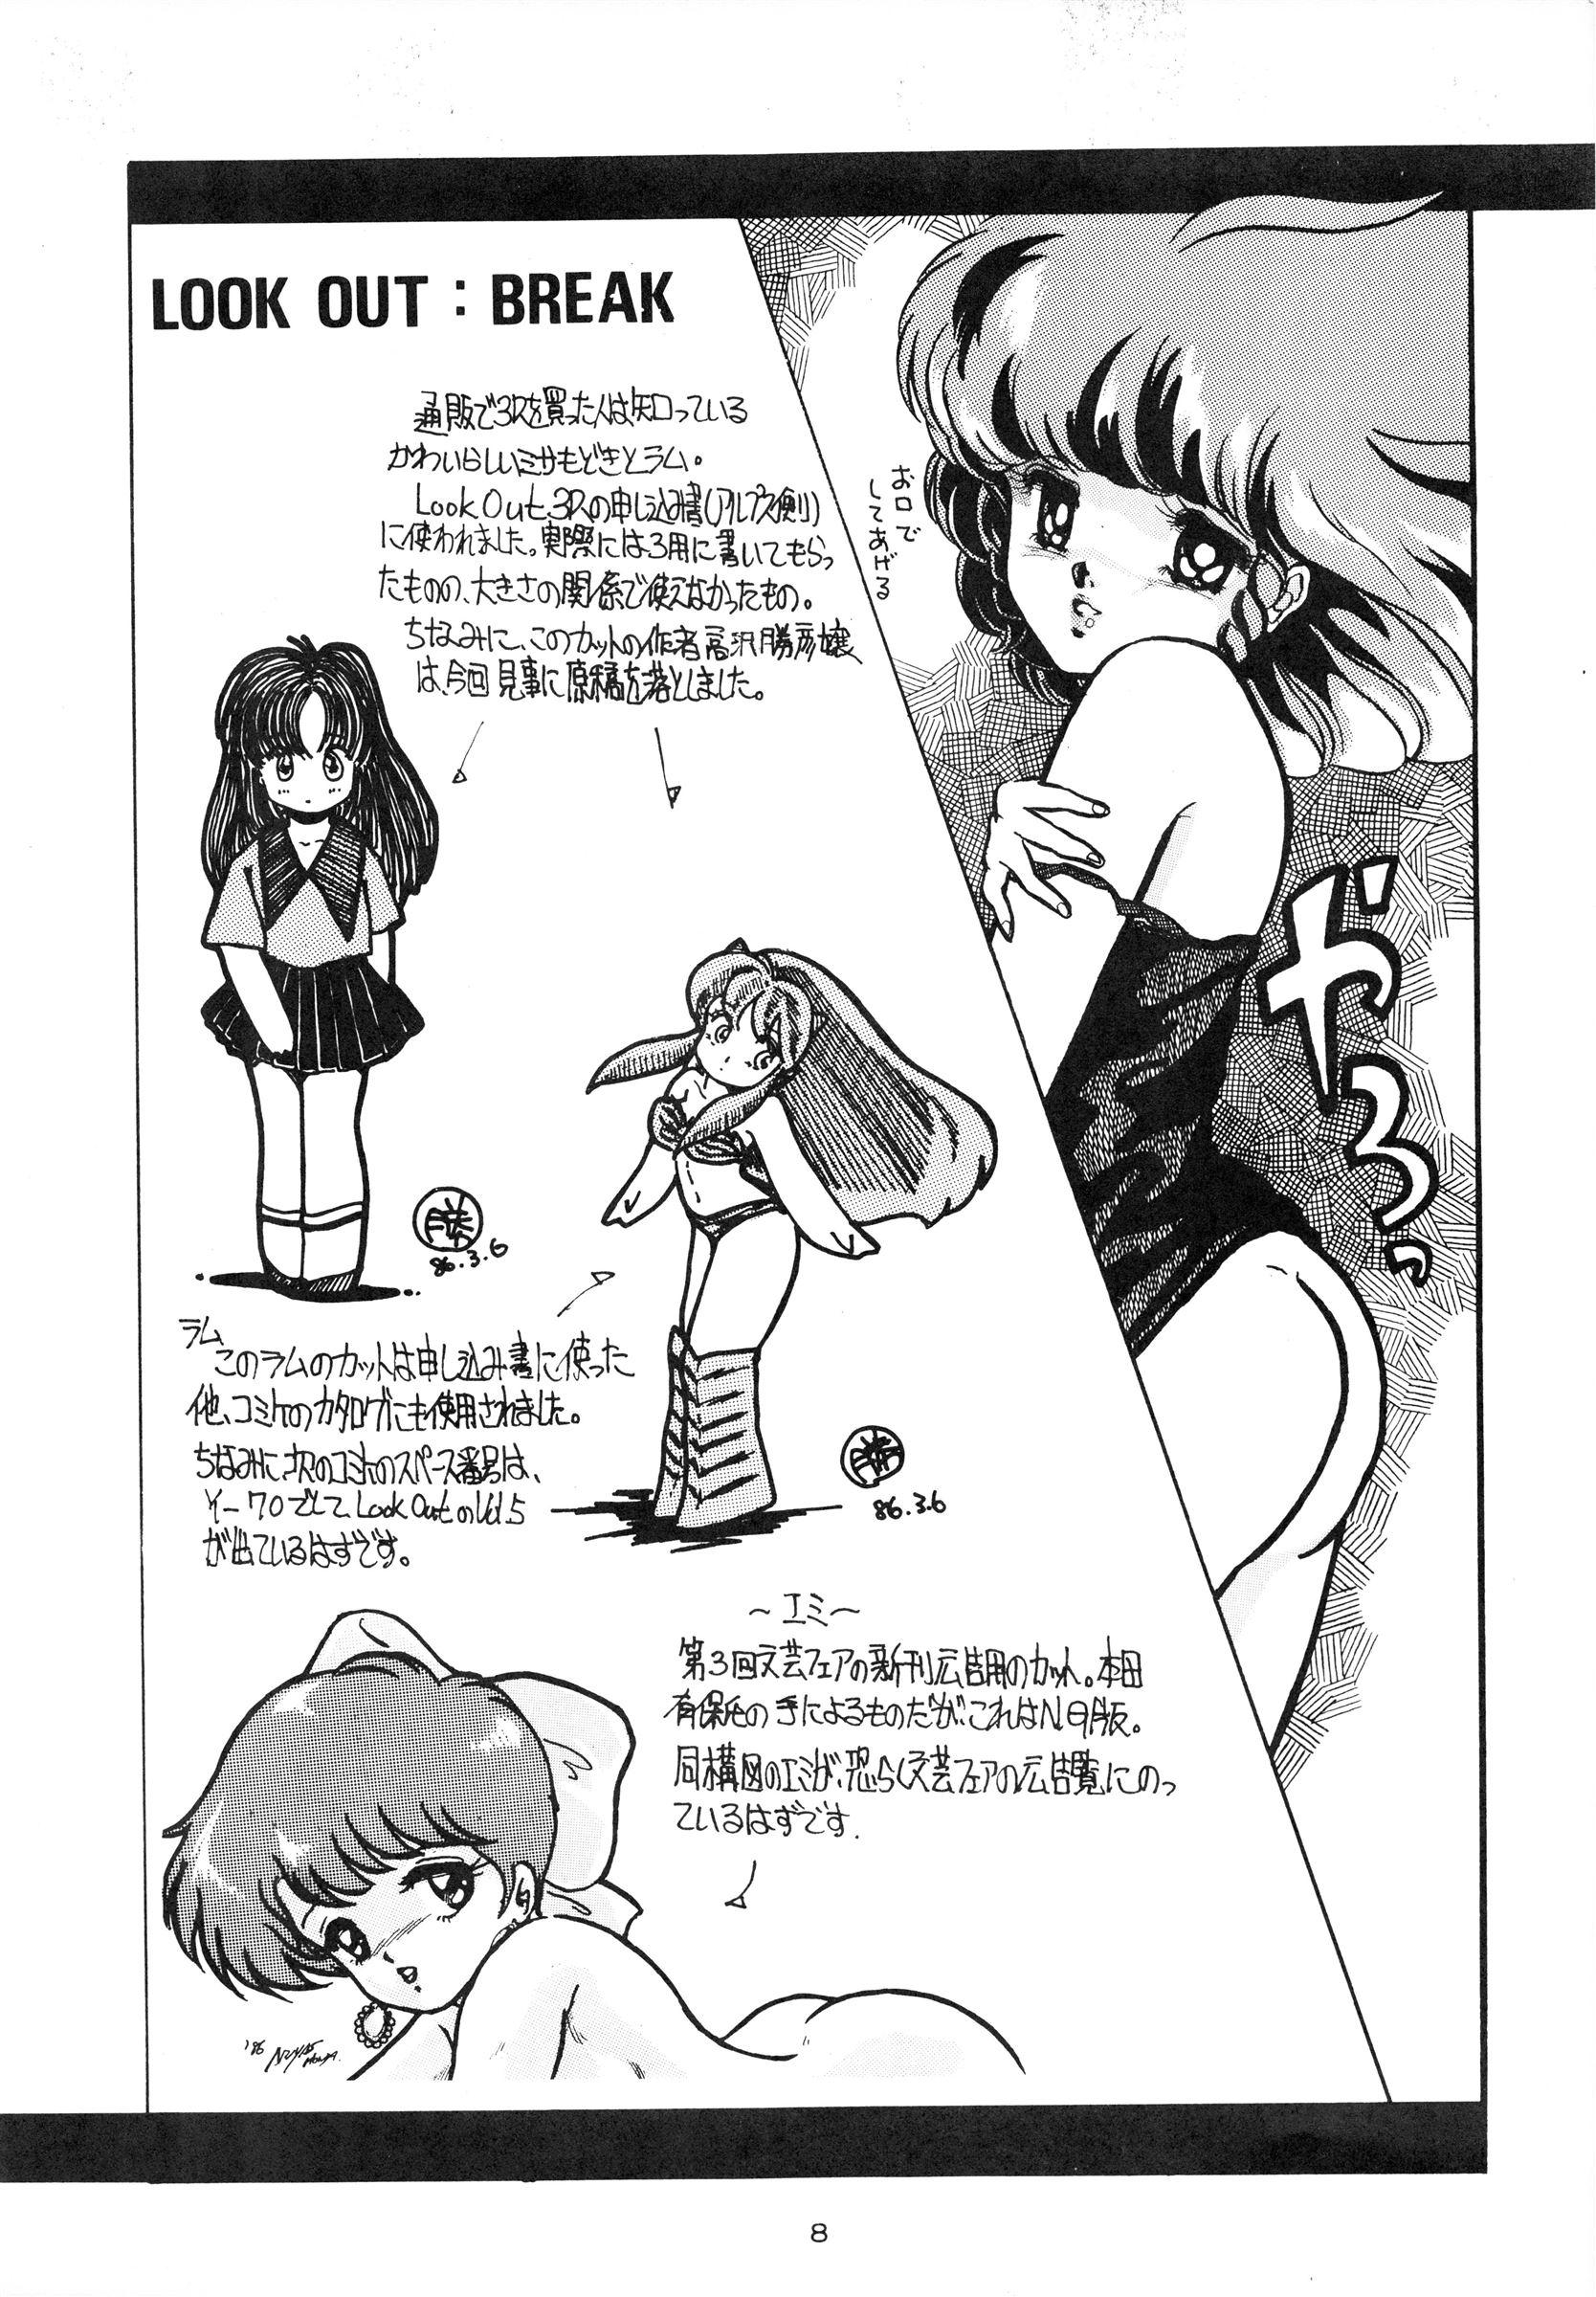 Mofos LOOK OUT 4 - Magical emi High school kimengumi Hair - Page 8